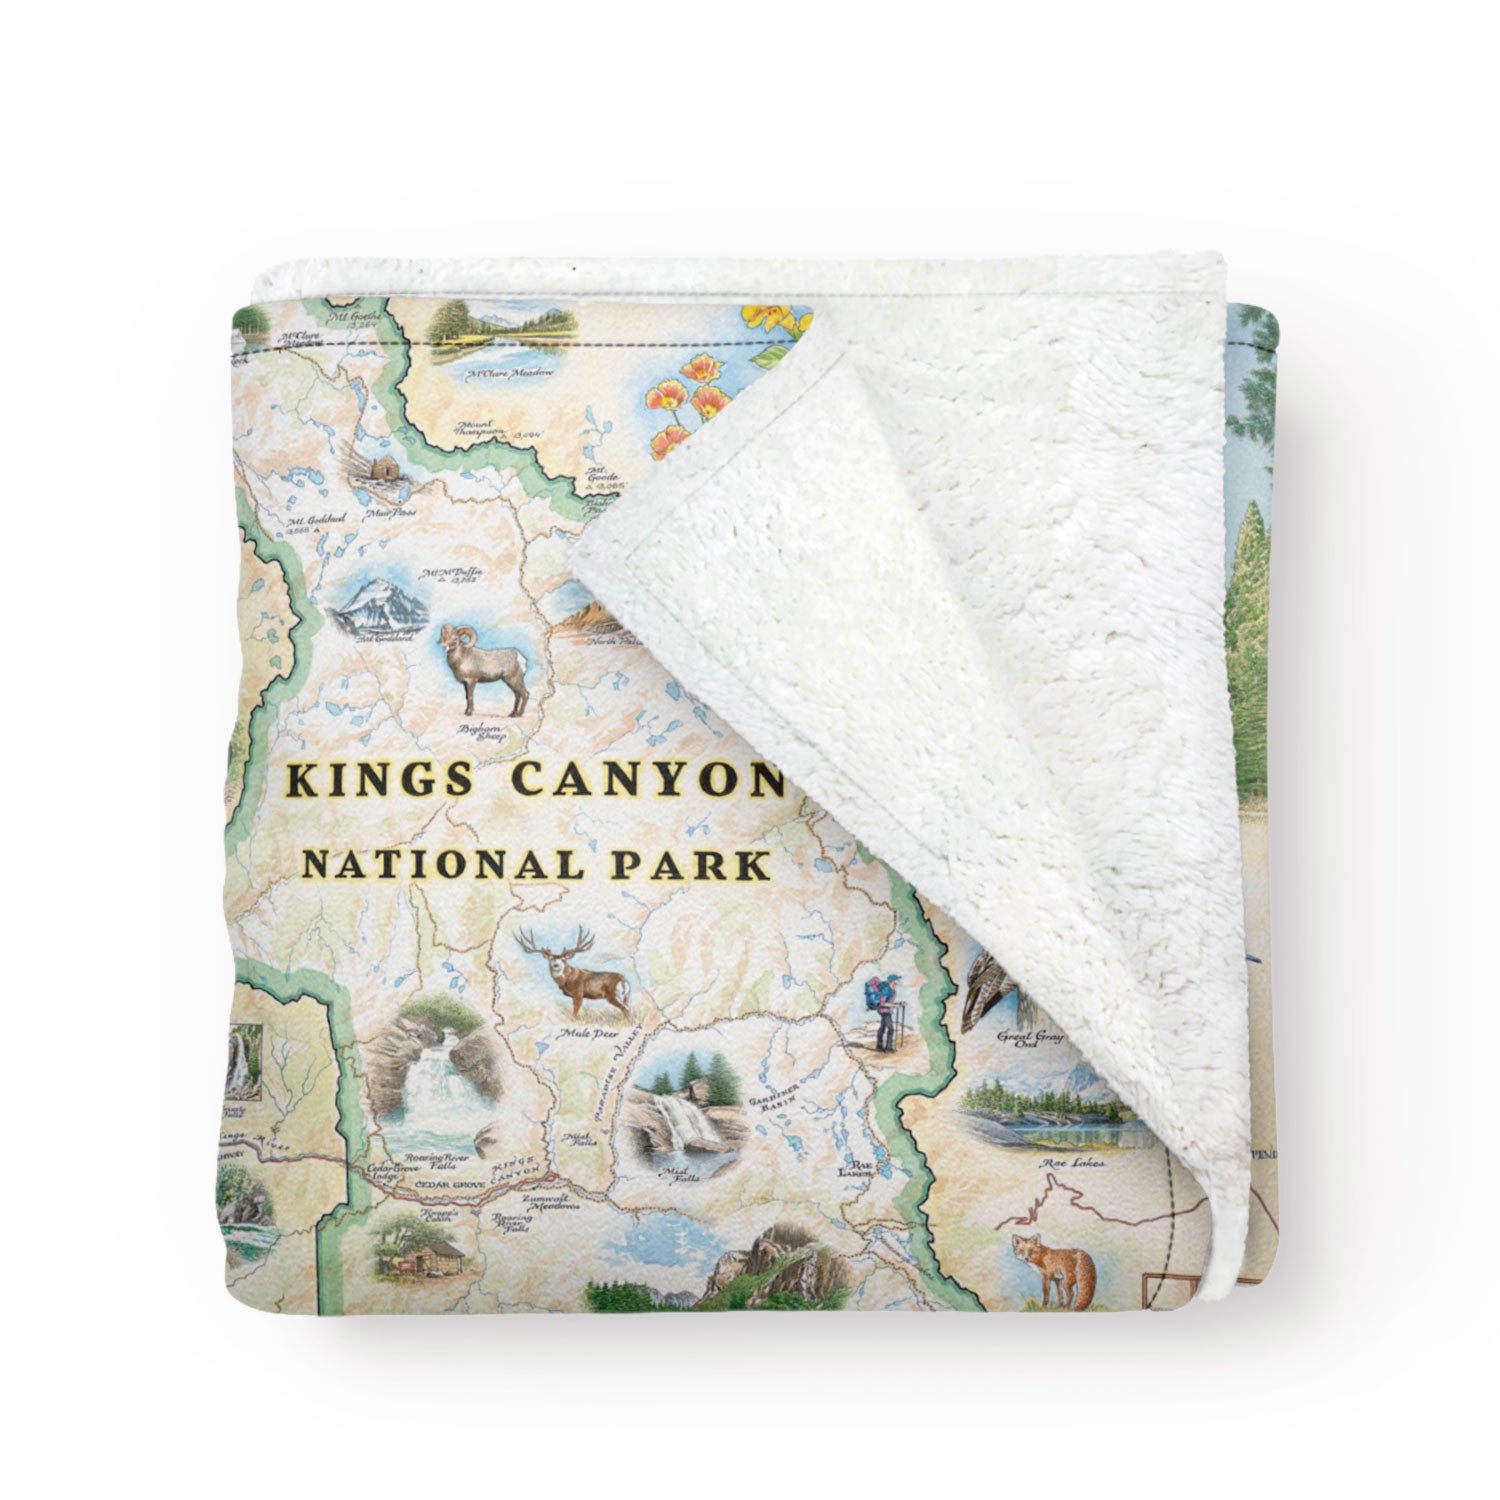 Colorful & artistic fleece blanket with map of Sequoia & Kings Canyon National Park map. Measures 58